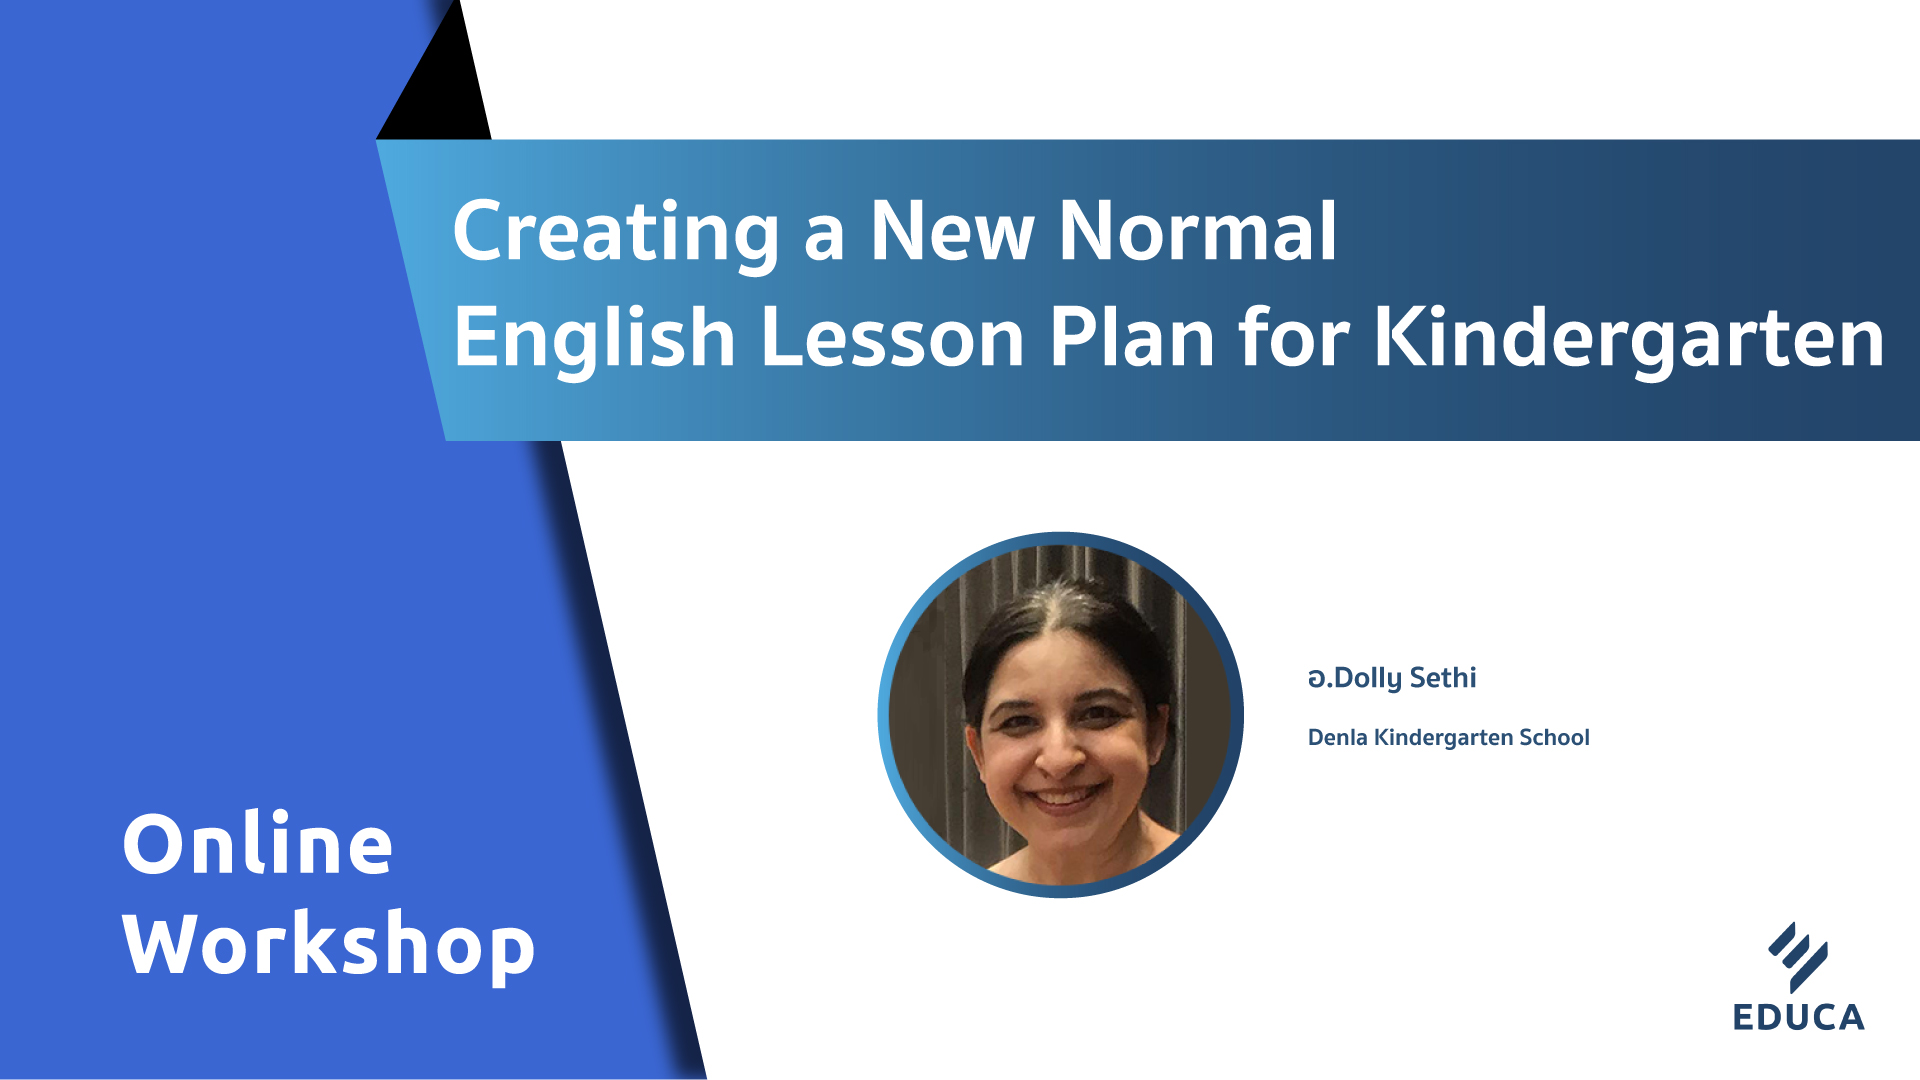 Creating a New Normal English Lesson Plan for Kindergarten